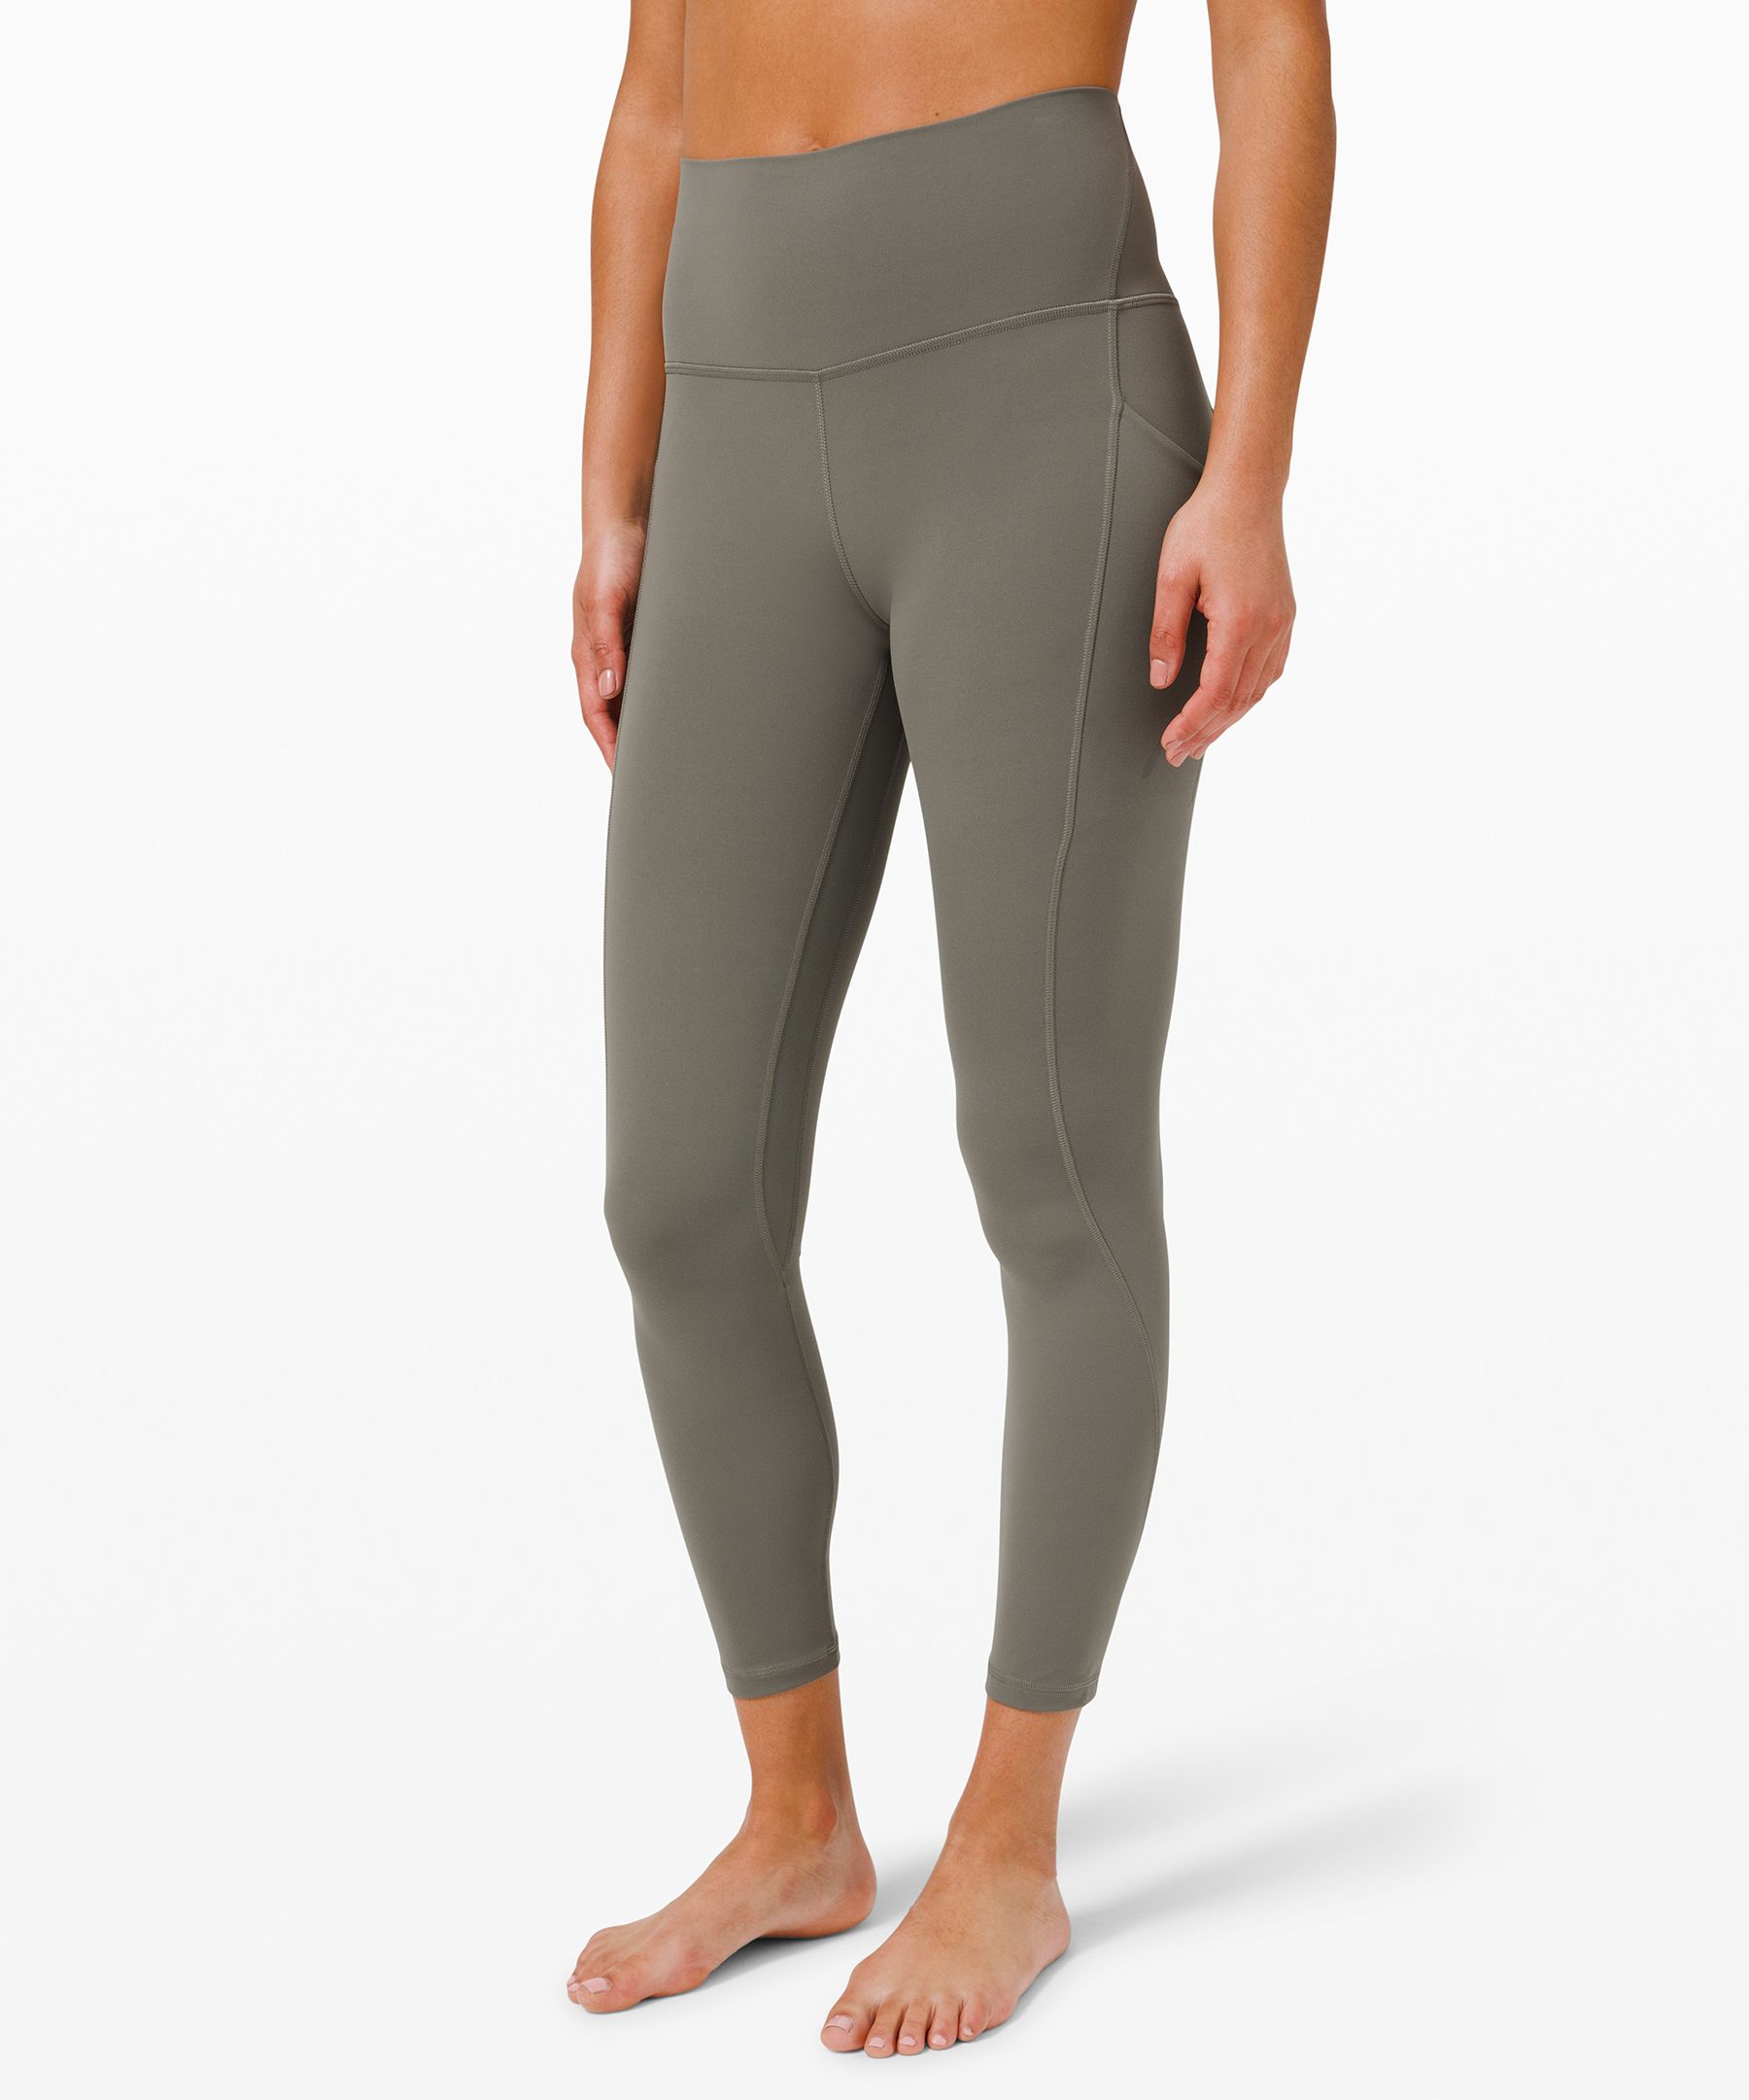 Lululemon Align™ High-rise Pant With Pockets 25" In Khaki